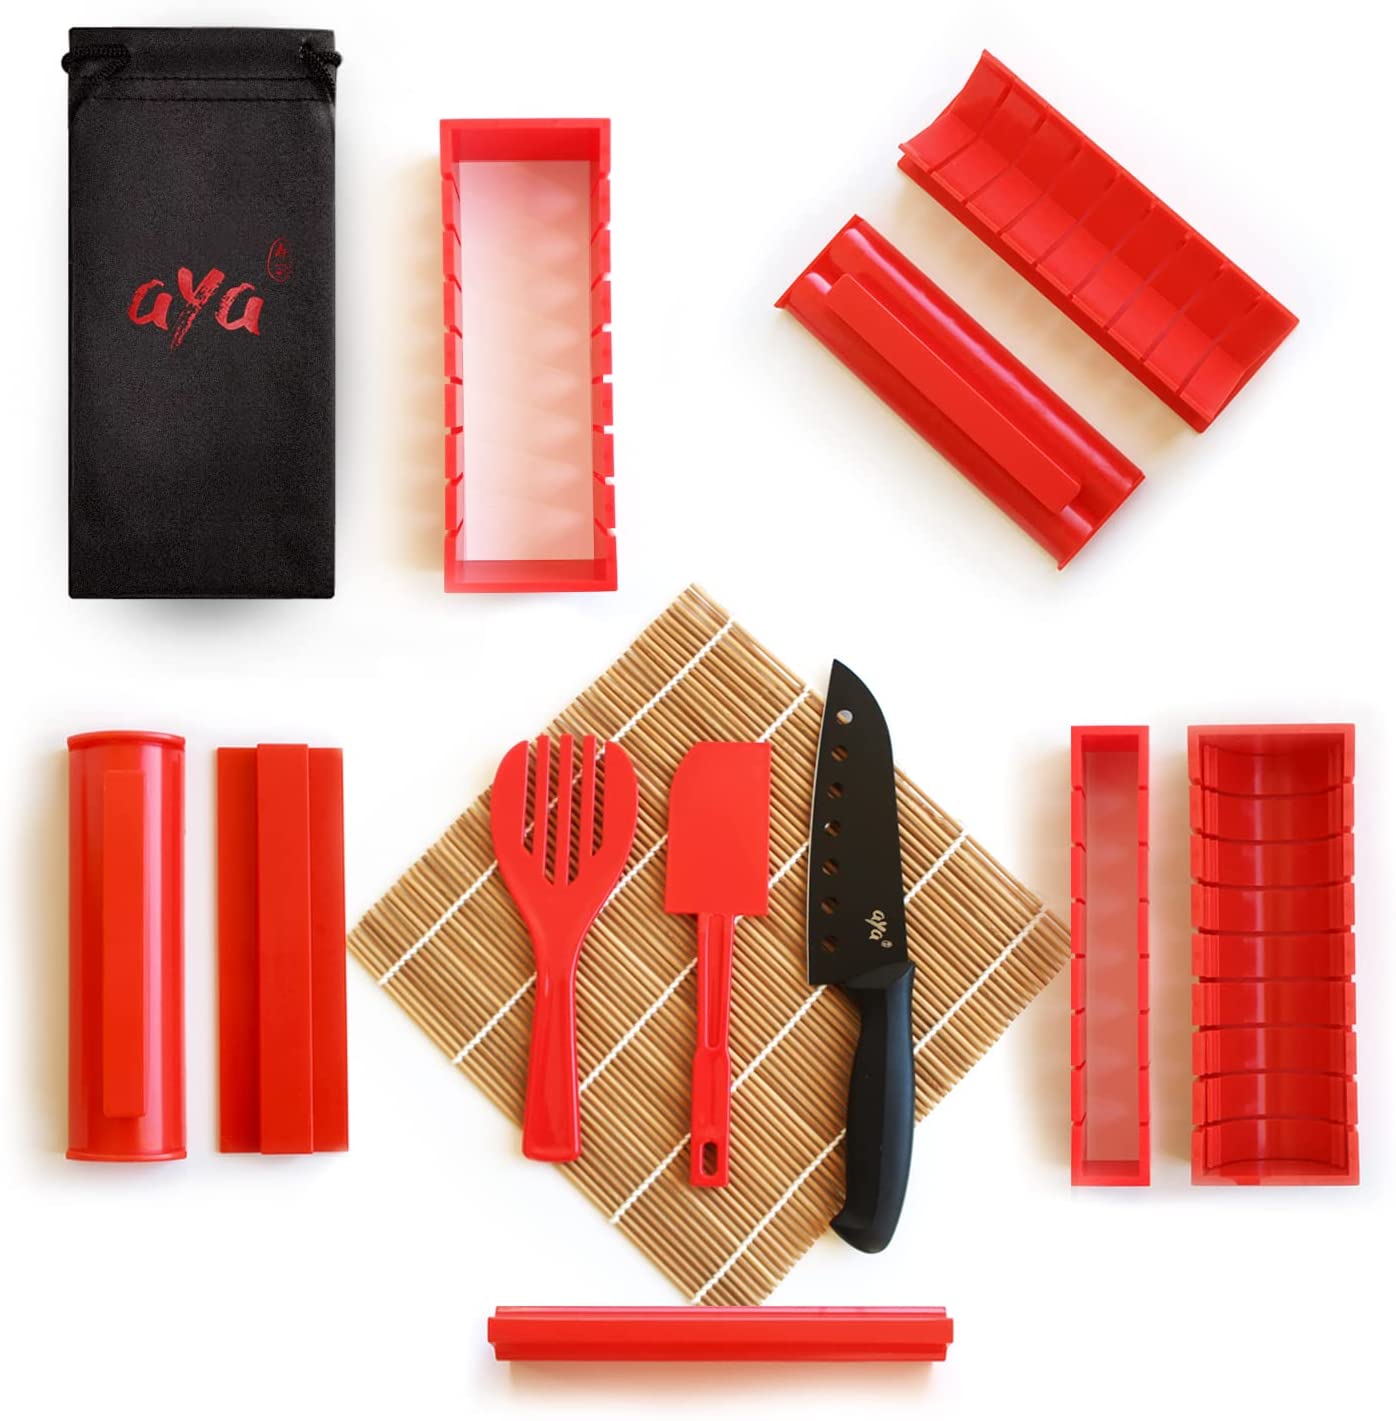 Sushi Kit - Sushi Maker Deluxe Red Complete Sushiaya with Knife and Exclusive Online Video Tutorial 11 Piece DIY Sushi Set - Easy and Fun for Beginners - Sushi Roll Maker - Maki Rolls